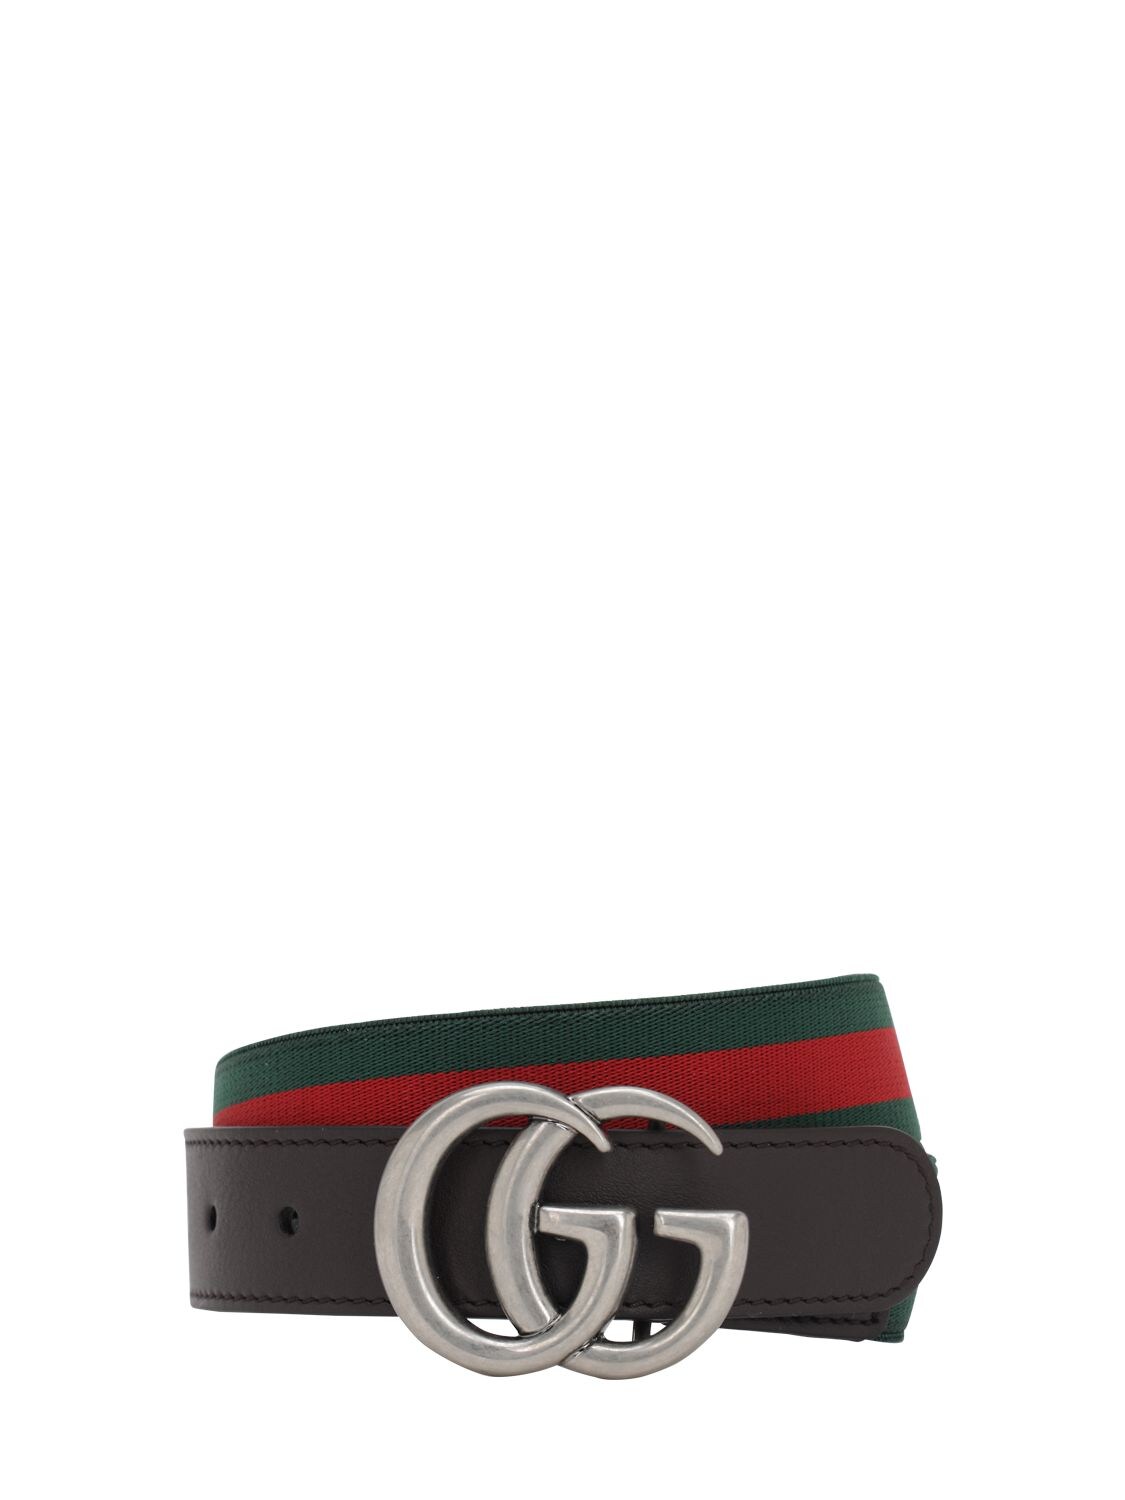 Gucci Kids' Elastic Belt W/ Leather Details In Green,red